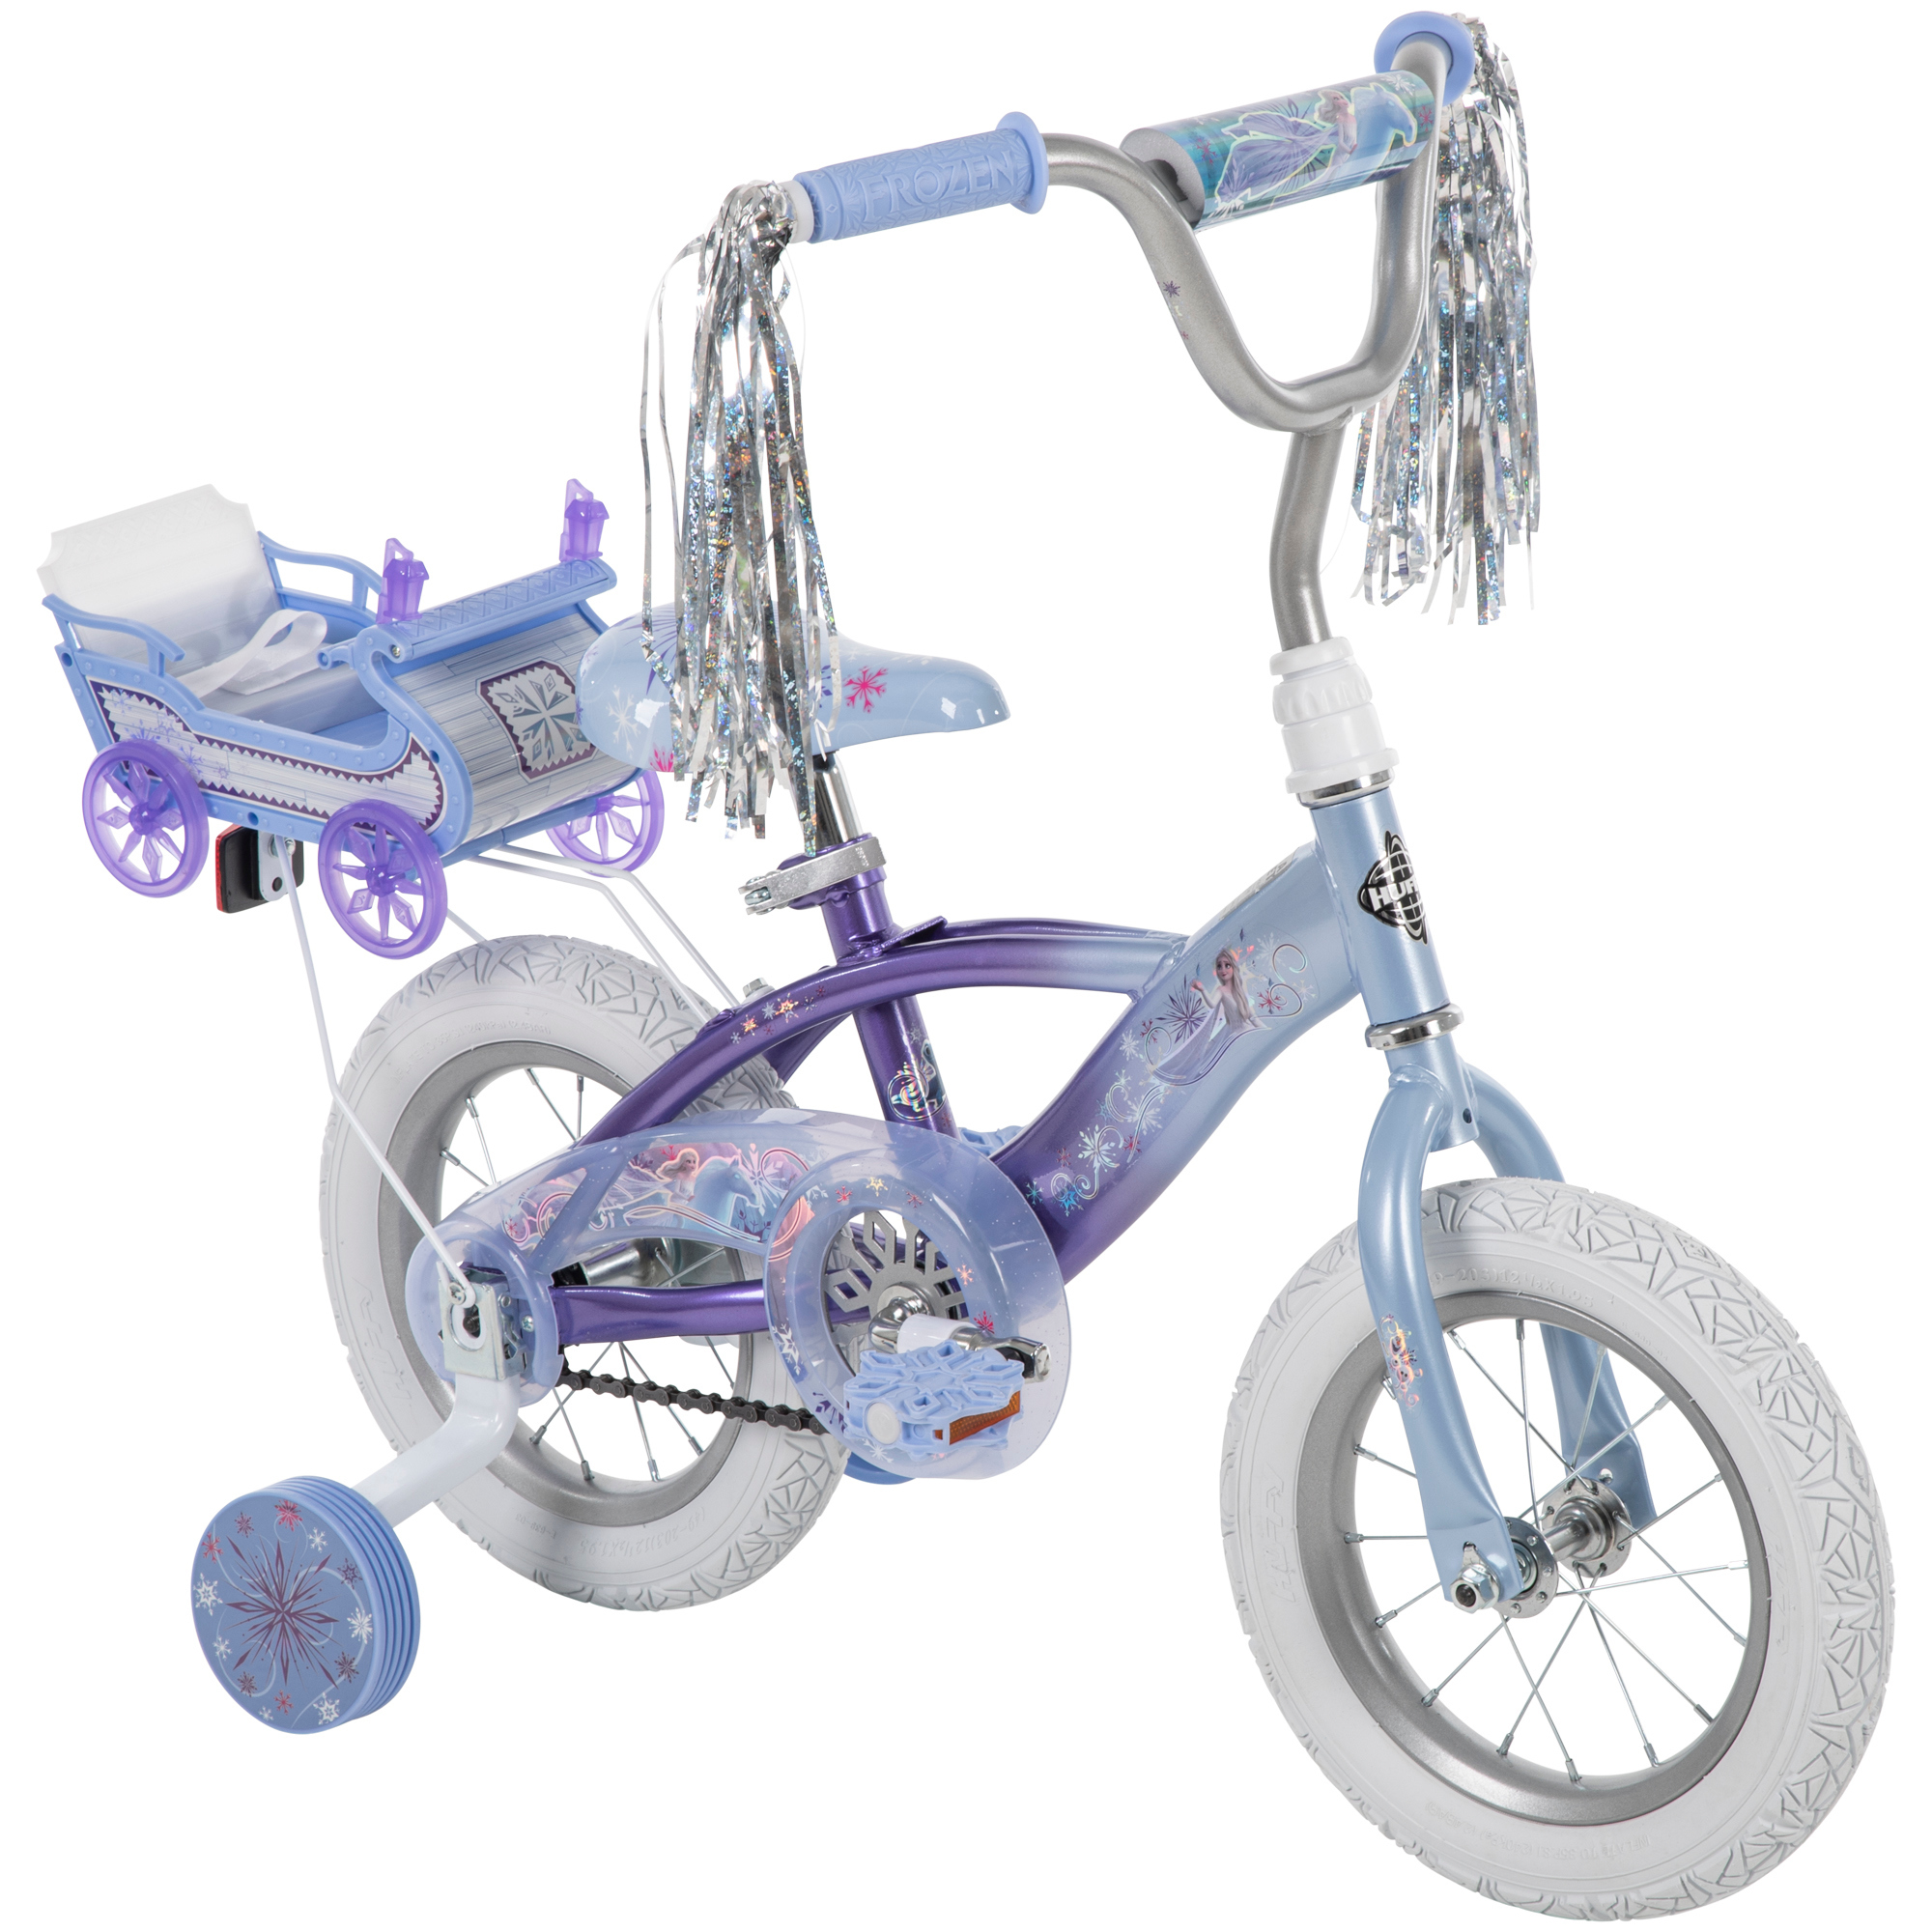 Disney Frozen 12 in. Bike with Doll Carrier Sleigh for Girl's, Ages 2+ Years, White and Purple by Huffy - image 16 of 19